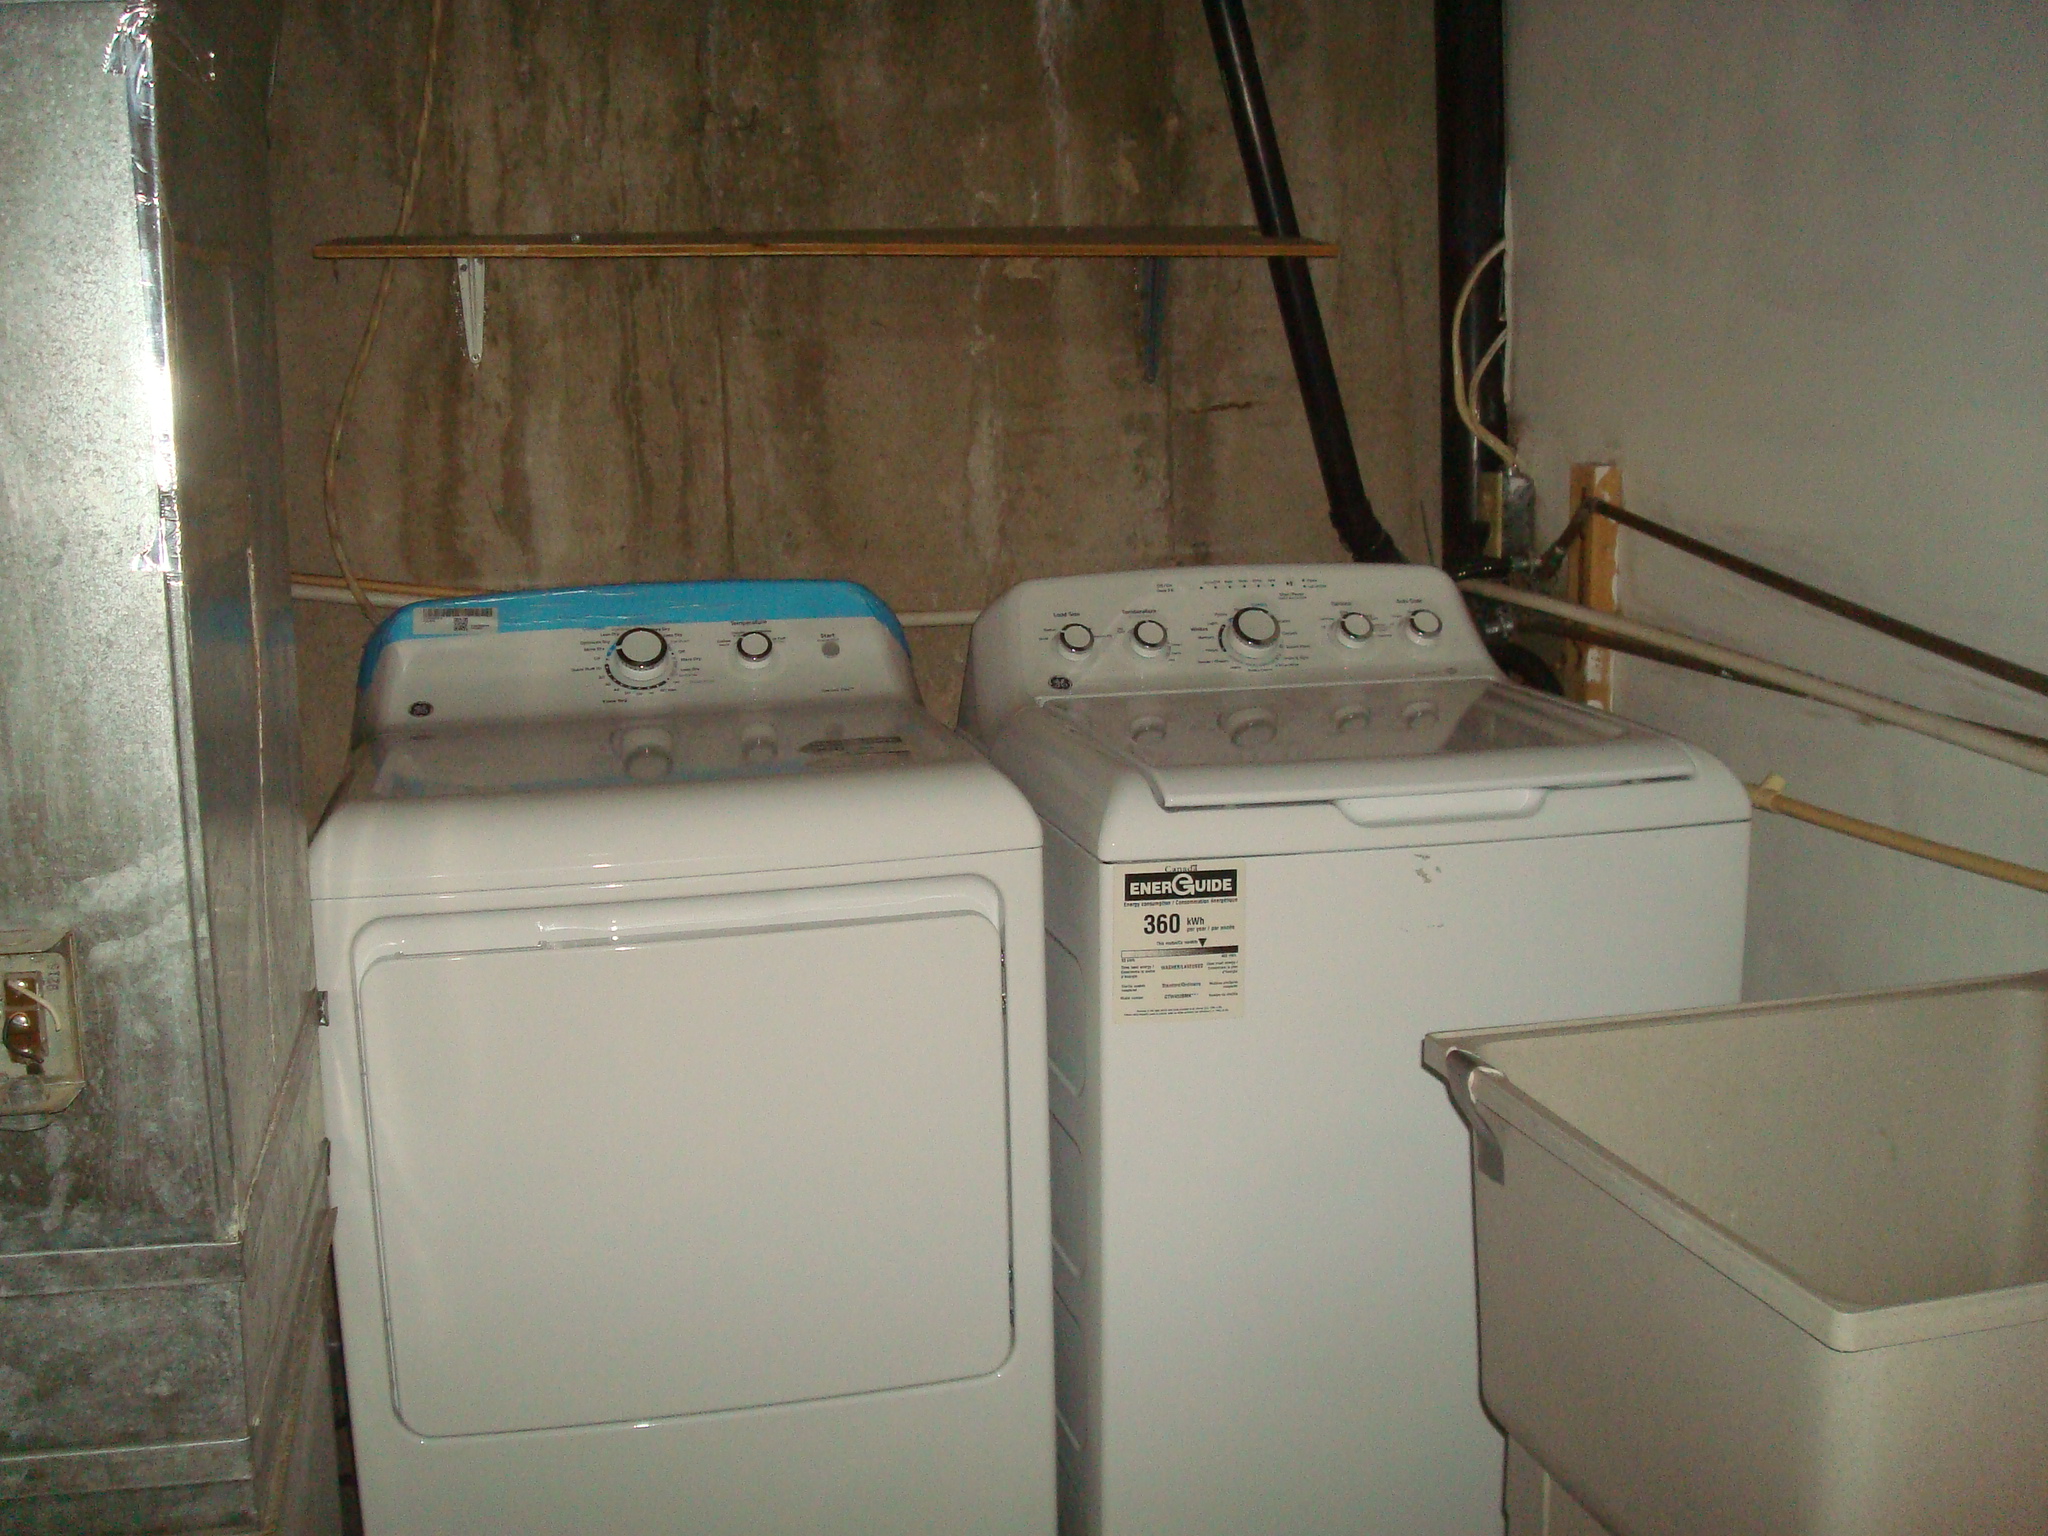 WASHER AND DRYER STAY